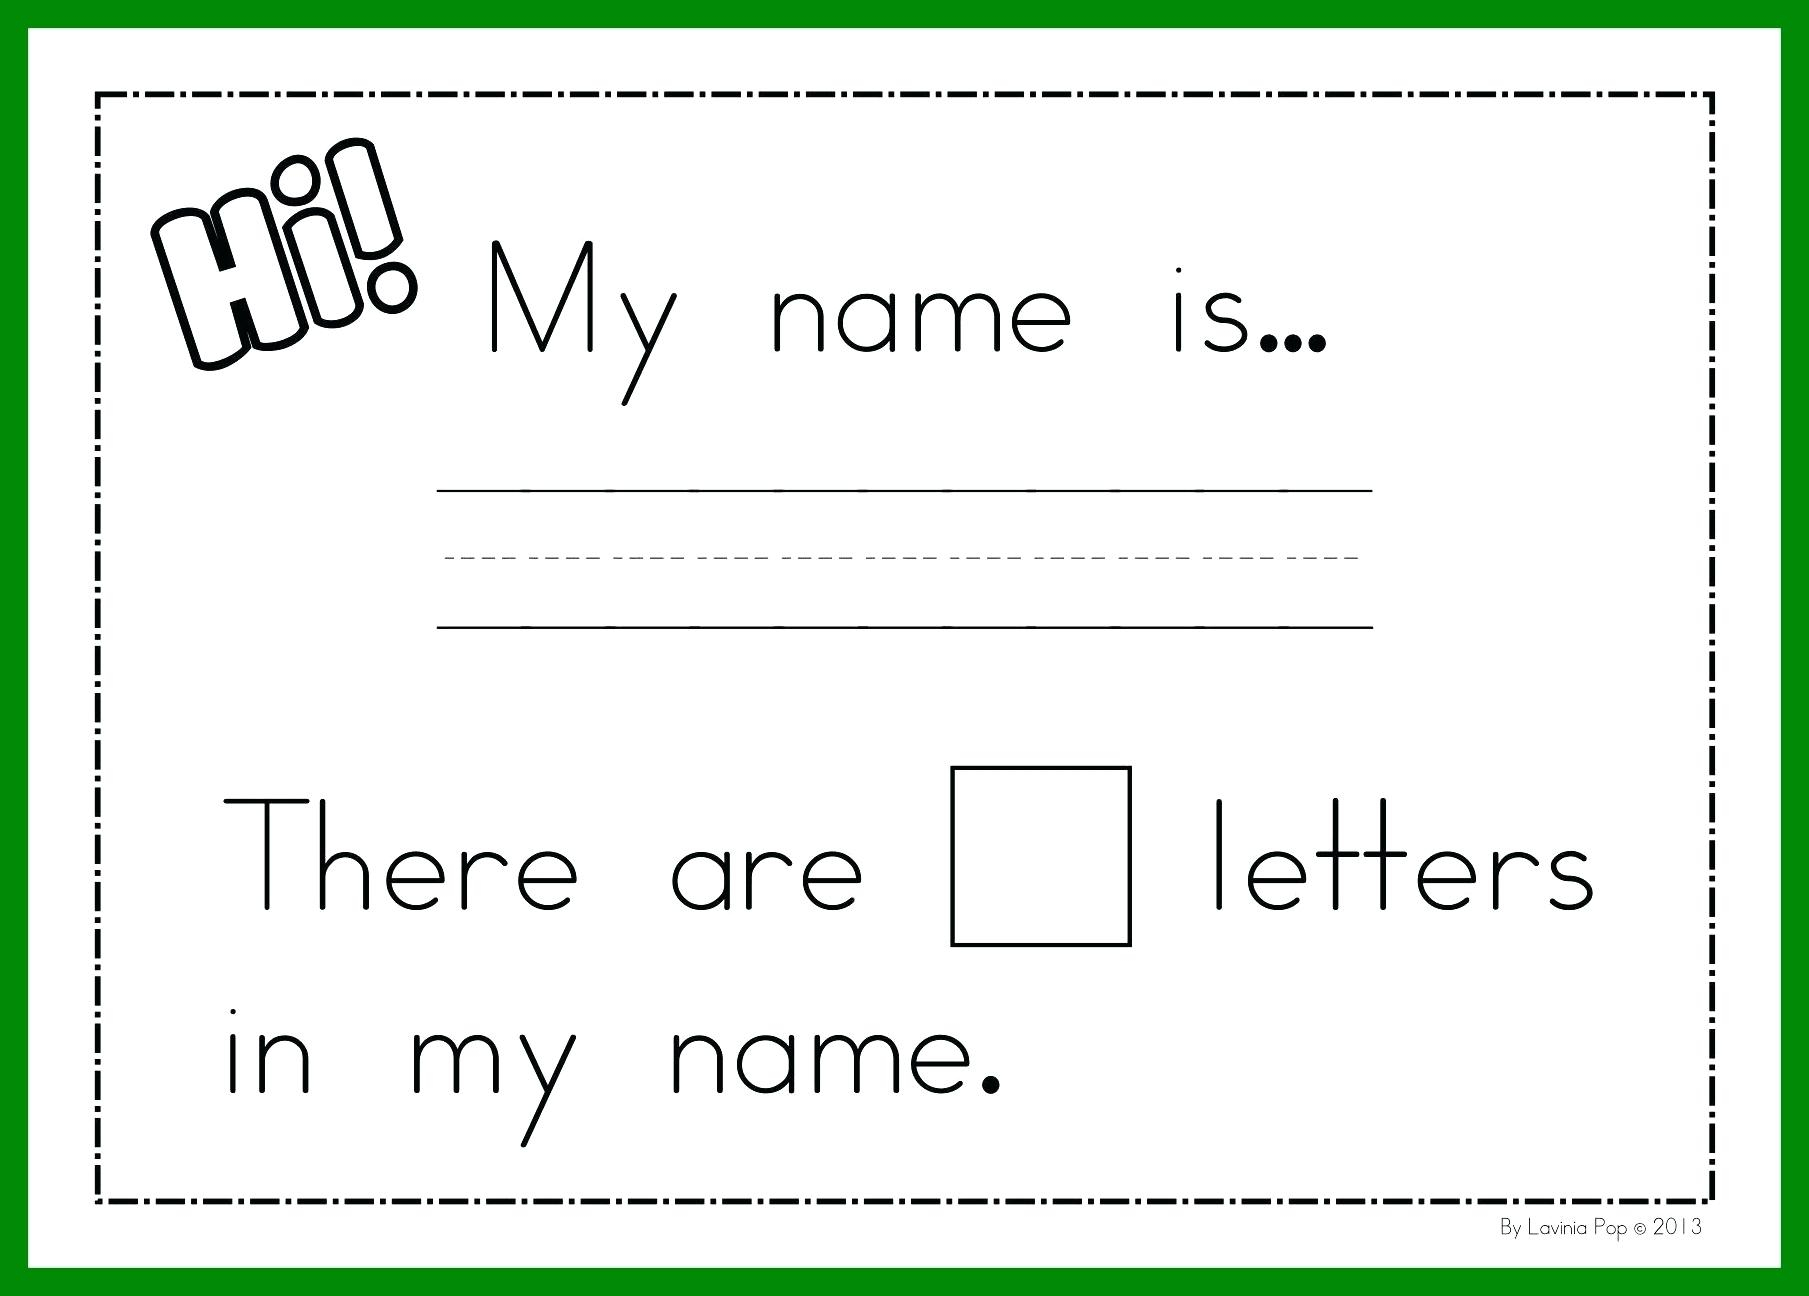 Preschool Name Tracing Worksheets Free - Clover Hatunisi intended for My Name Tracing